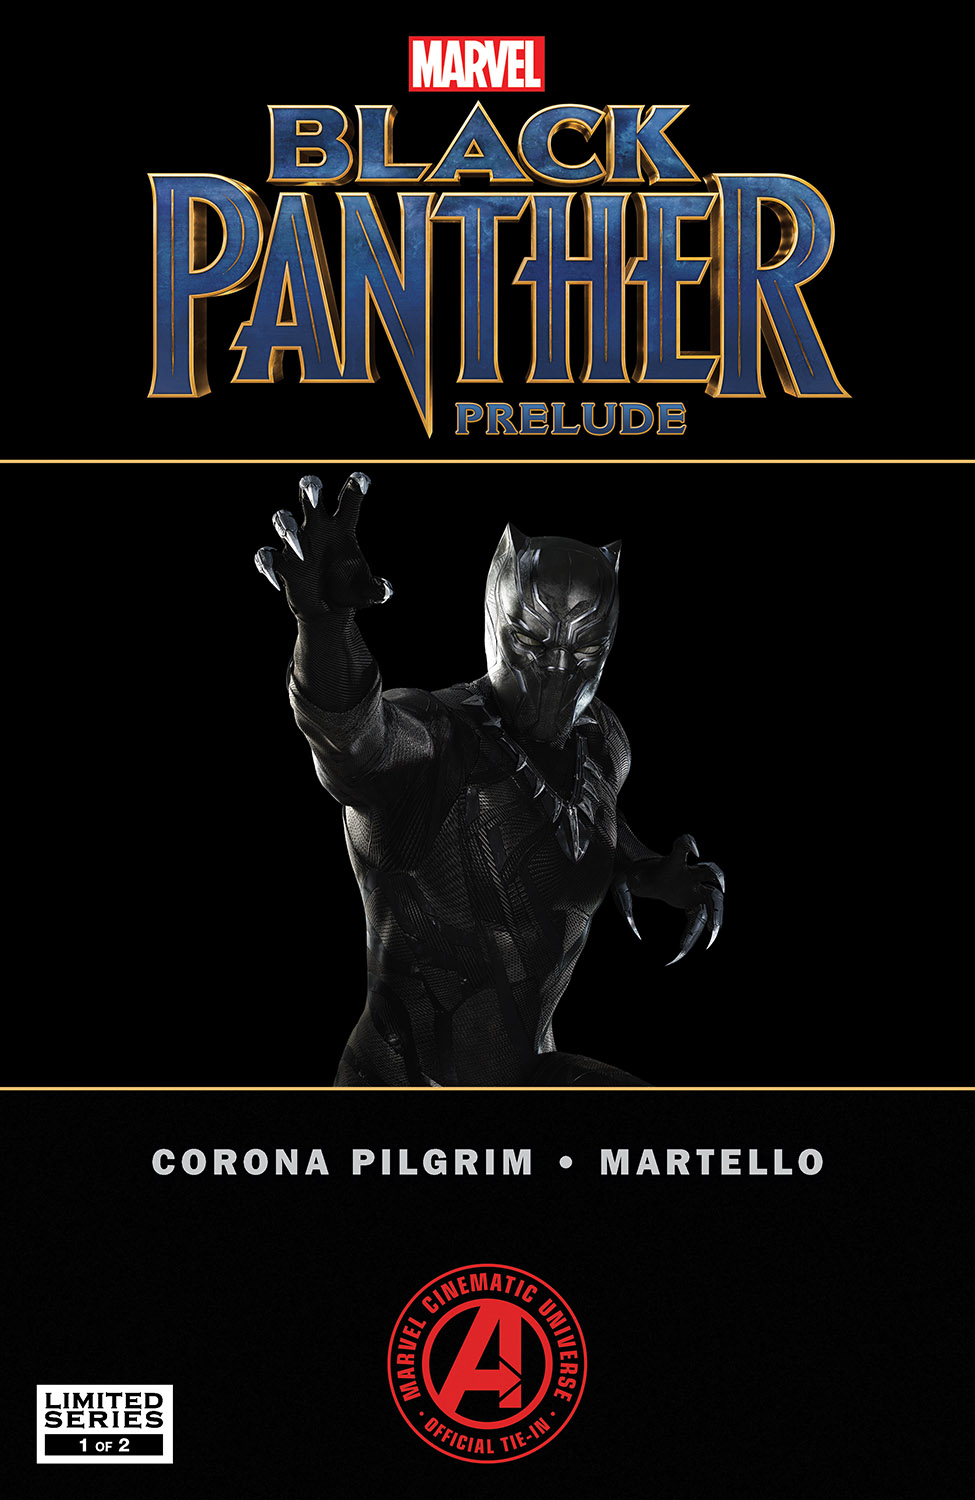 Marvel's Black Panther Prelude (2017) #1